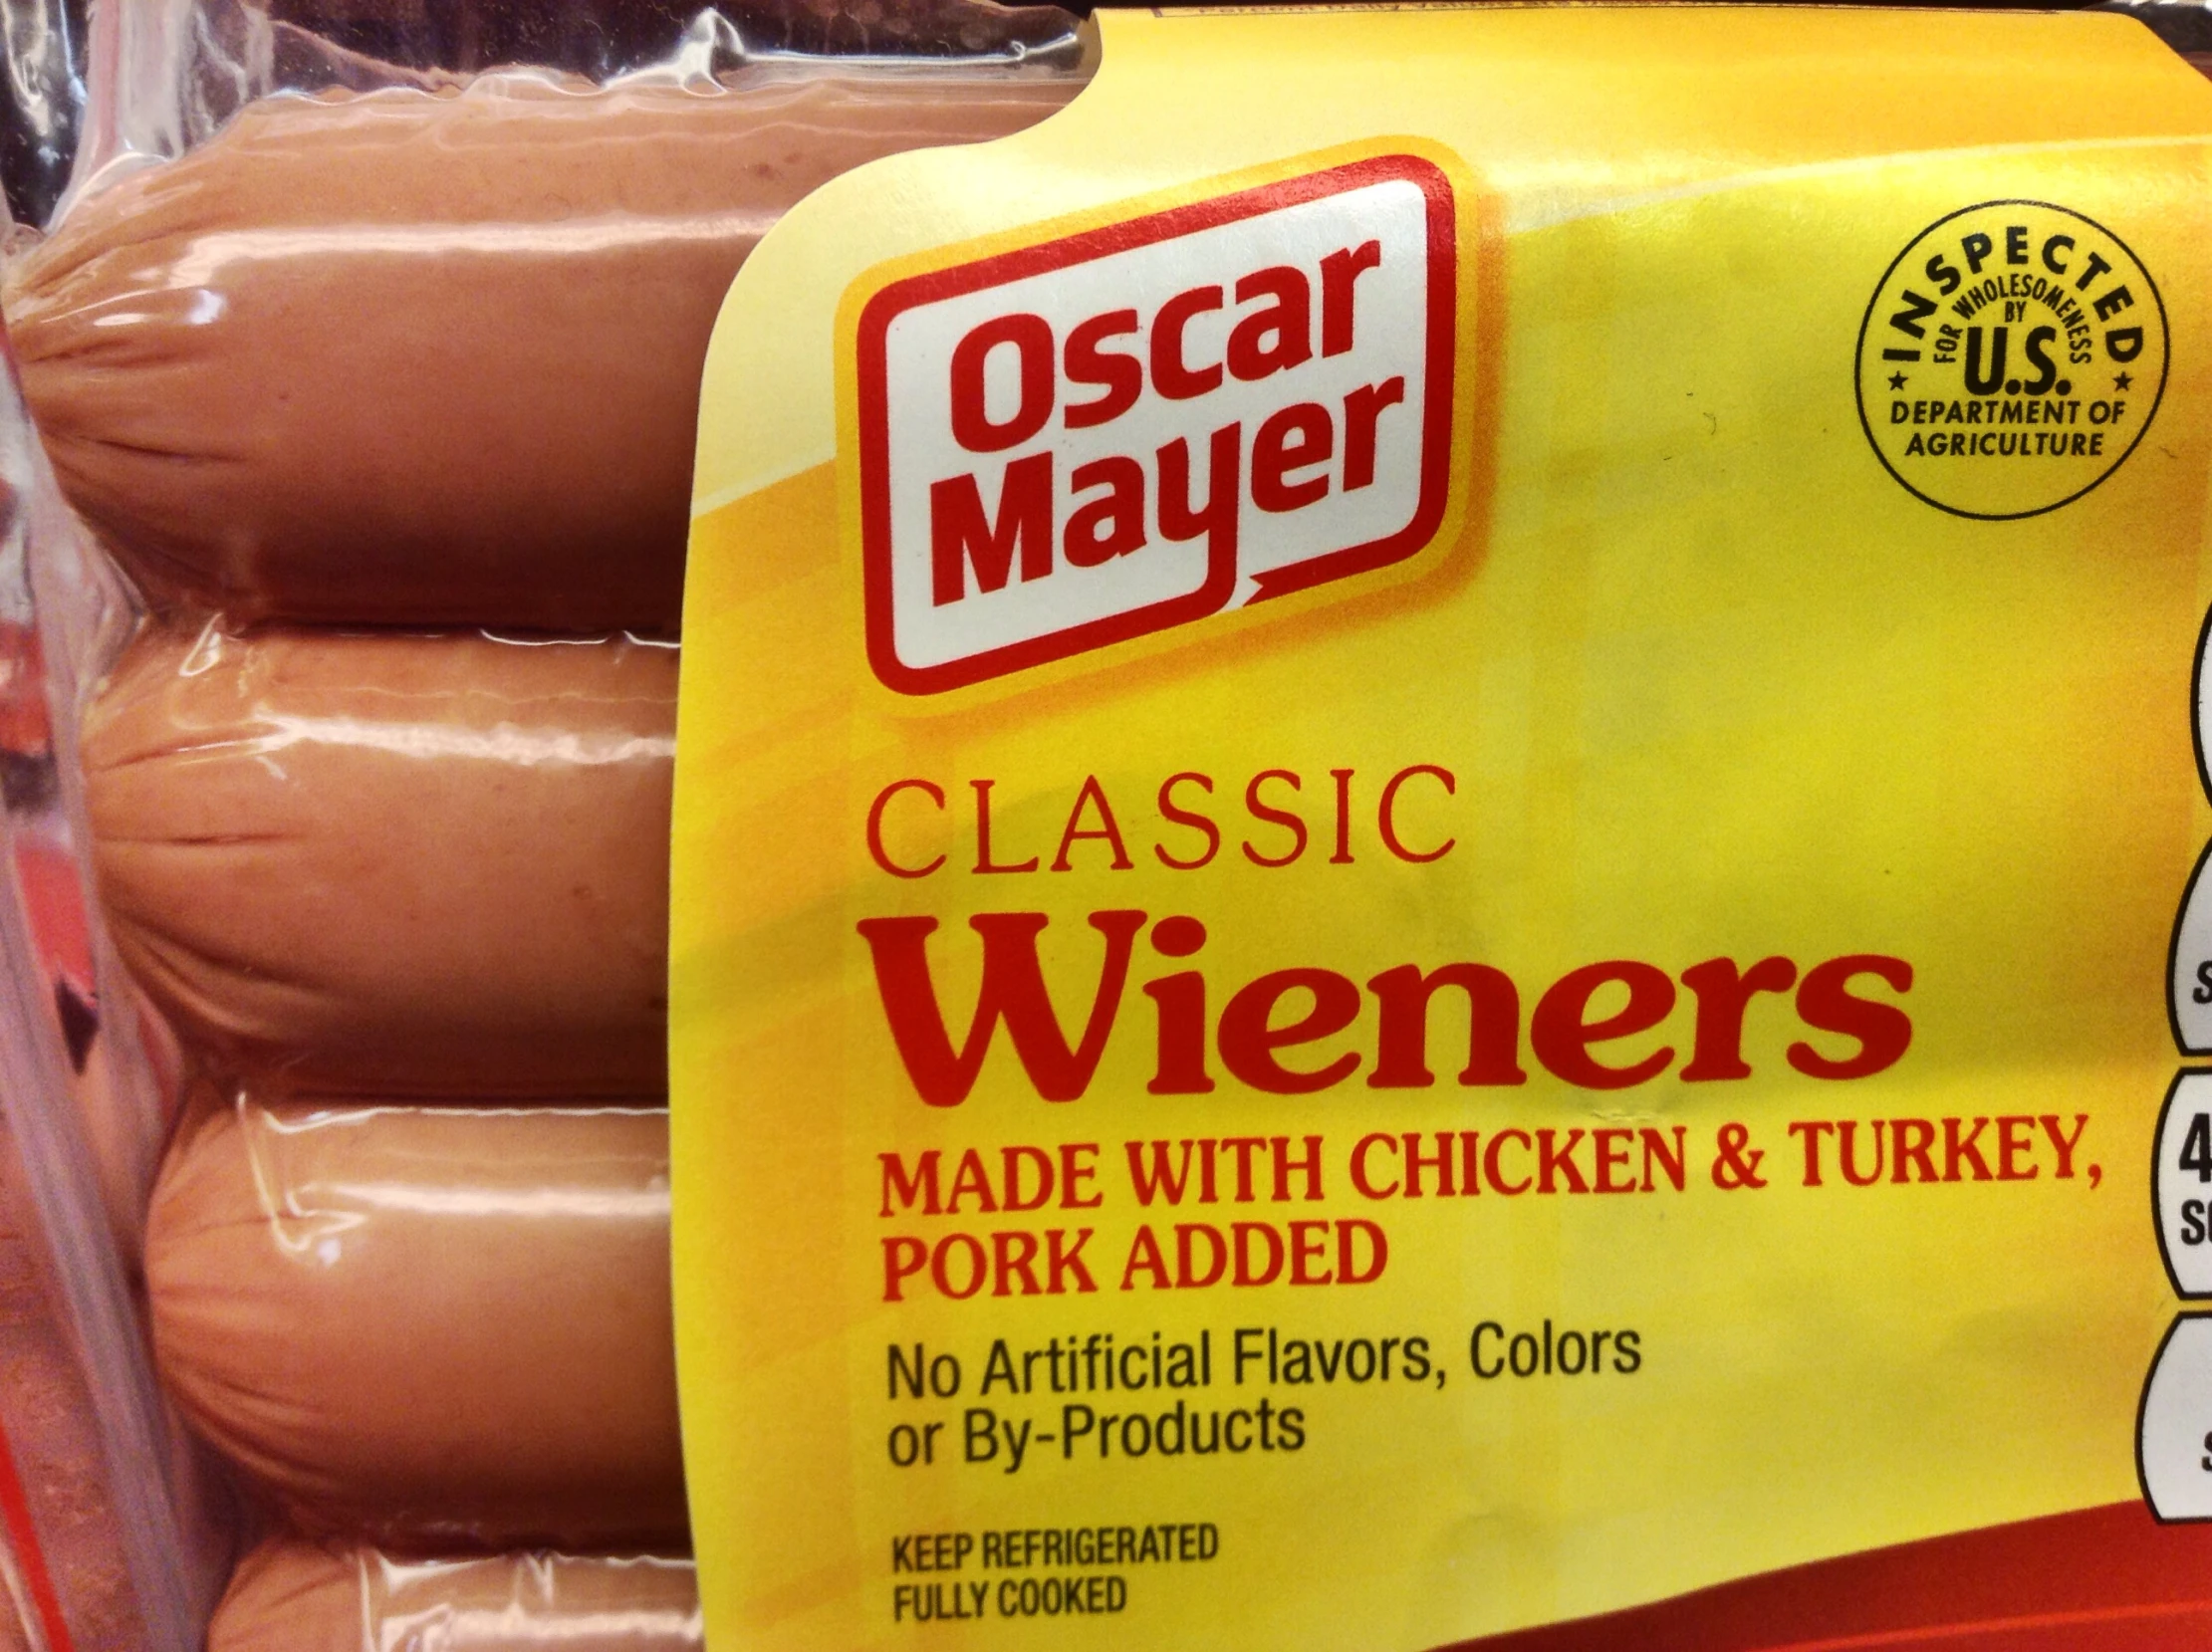 a close up of a package of some type of wieners